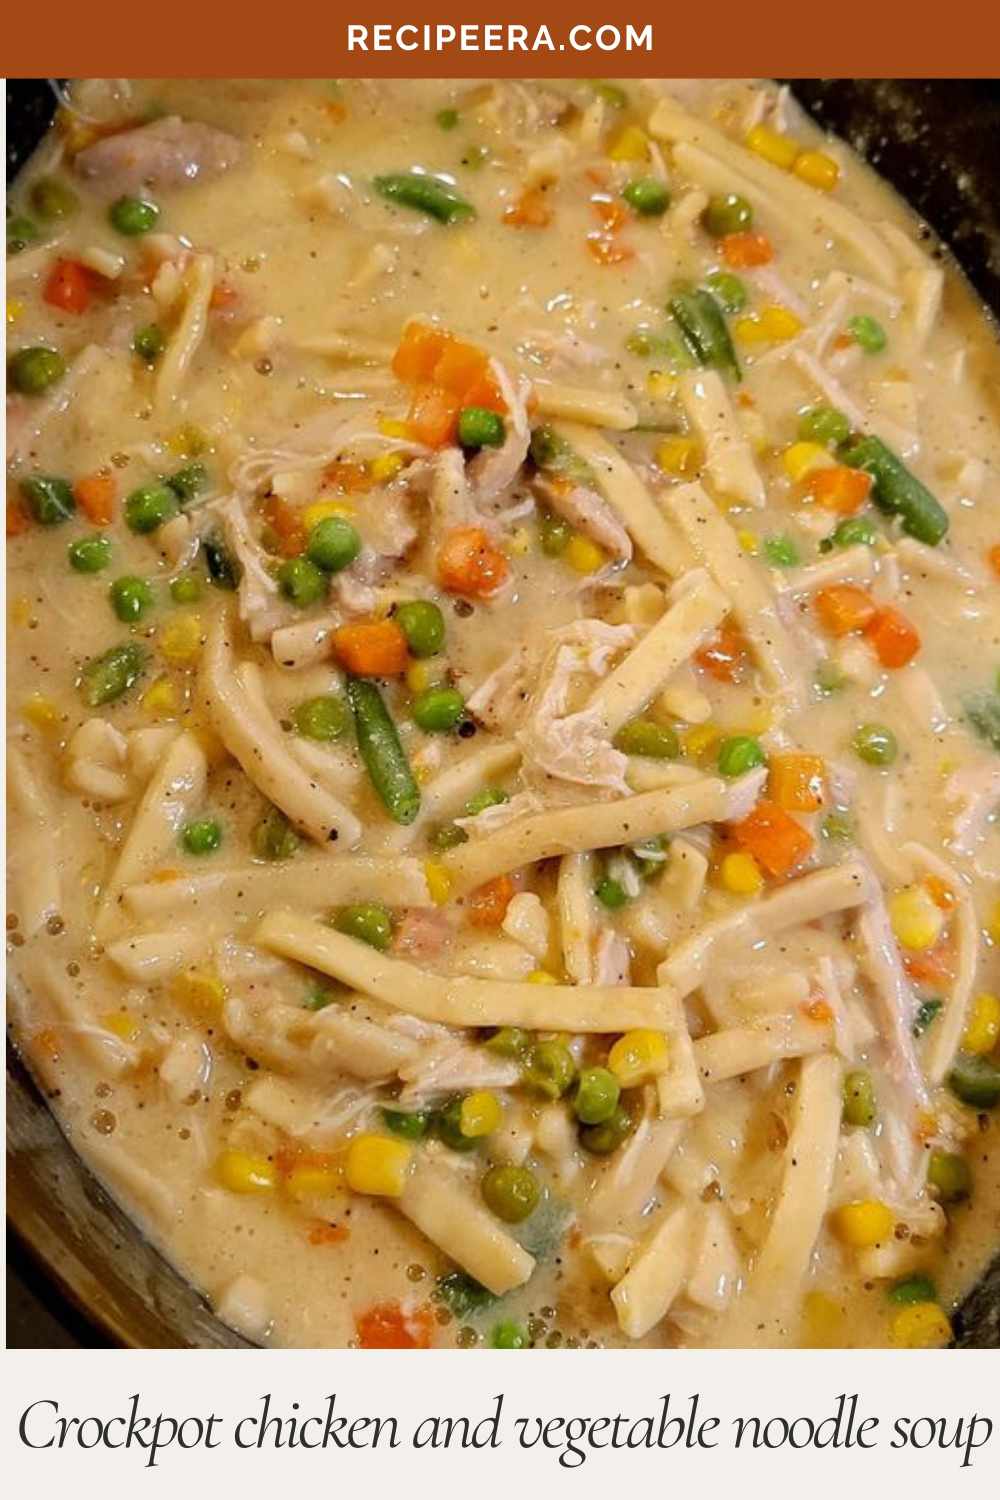 Crockpot Chicken and Vegetable Noodle Soup | Recipeera